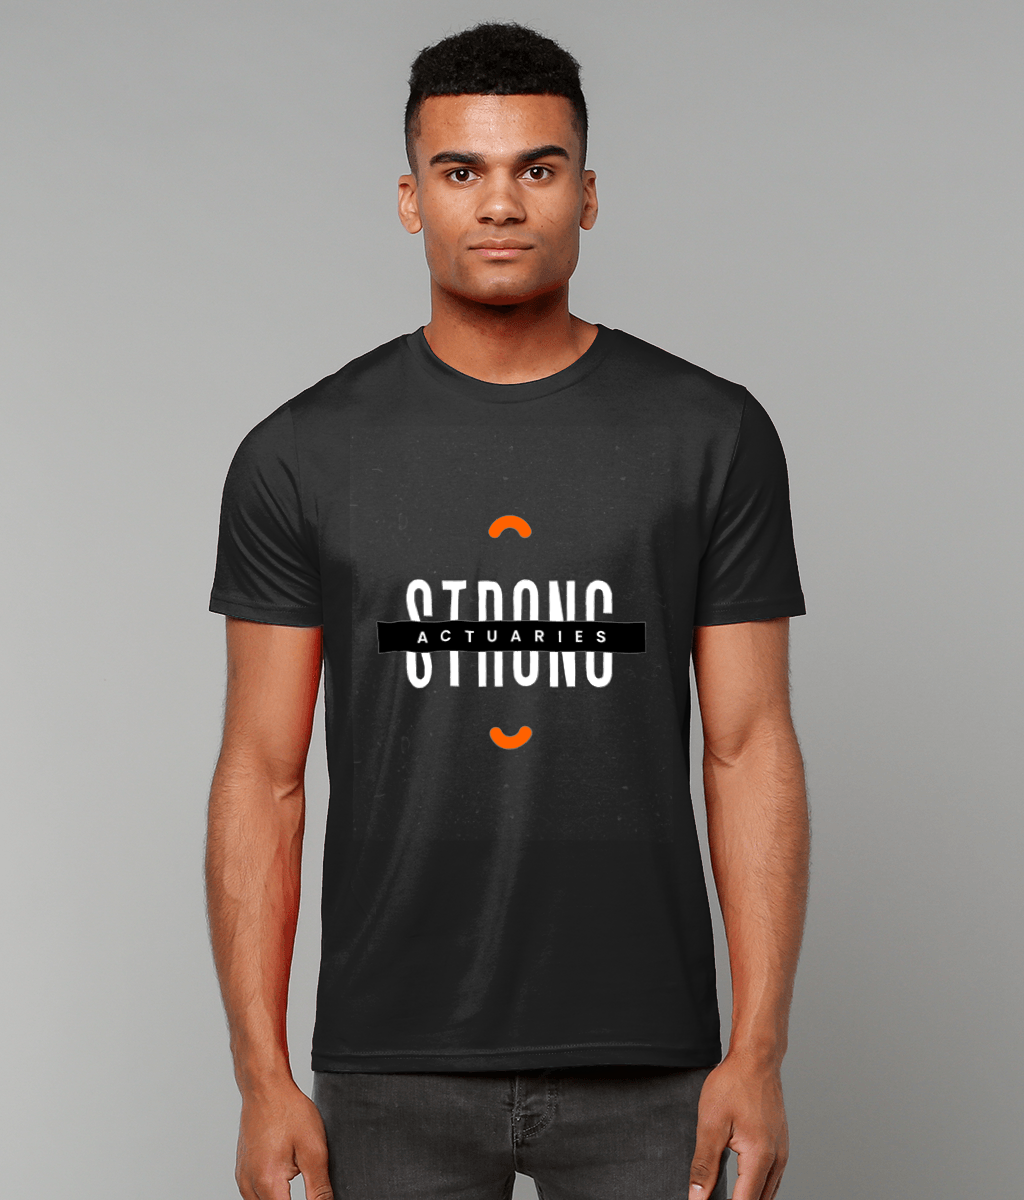 Actuaries Strong Black and White Texture Typography Black T-Shirt